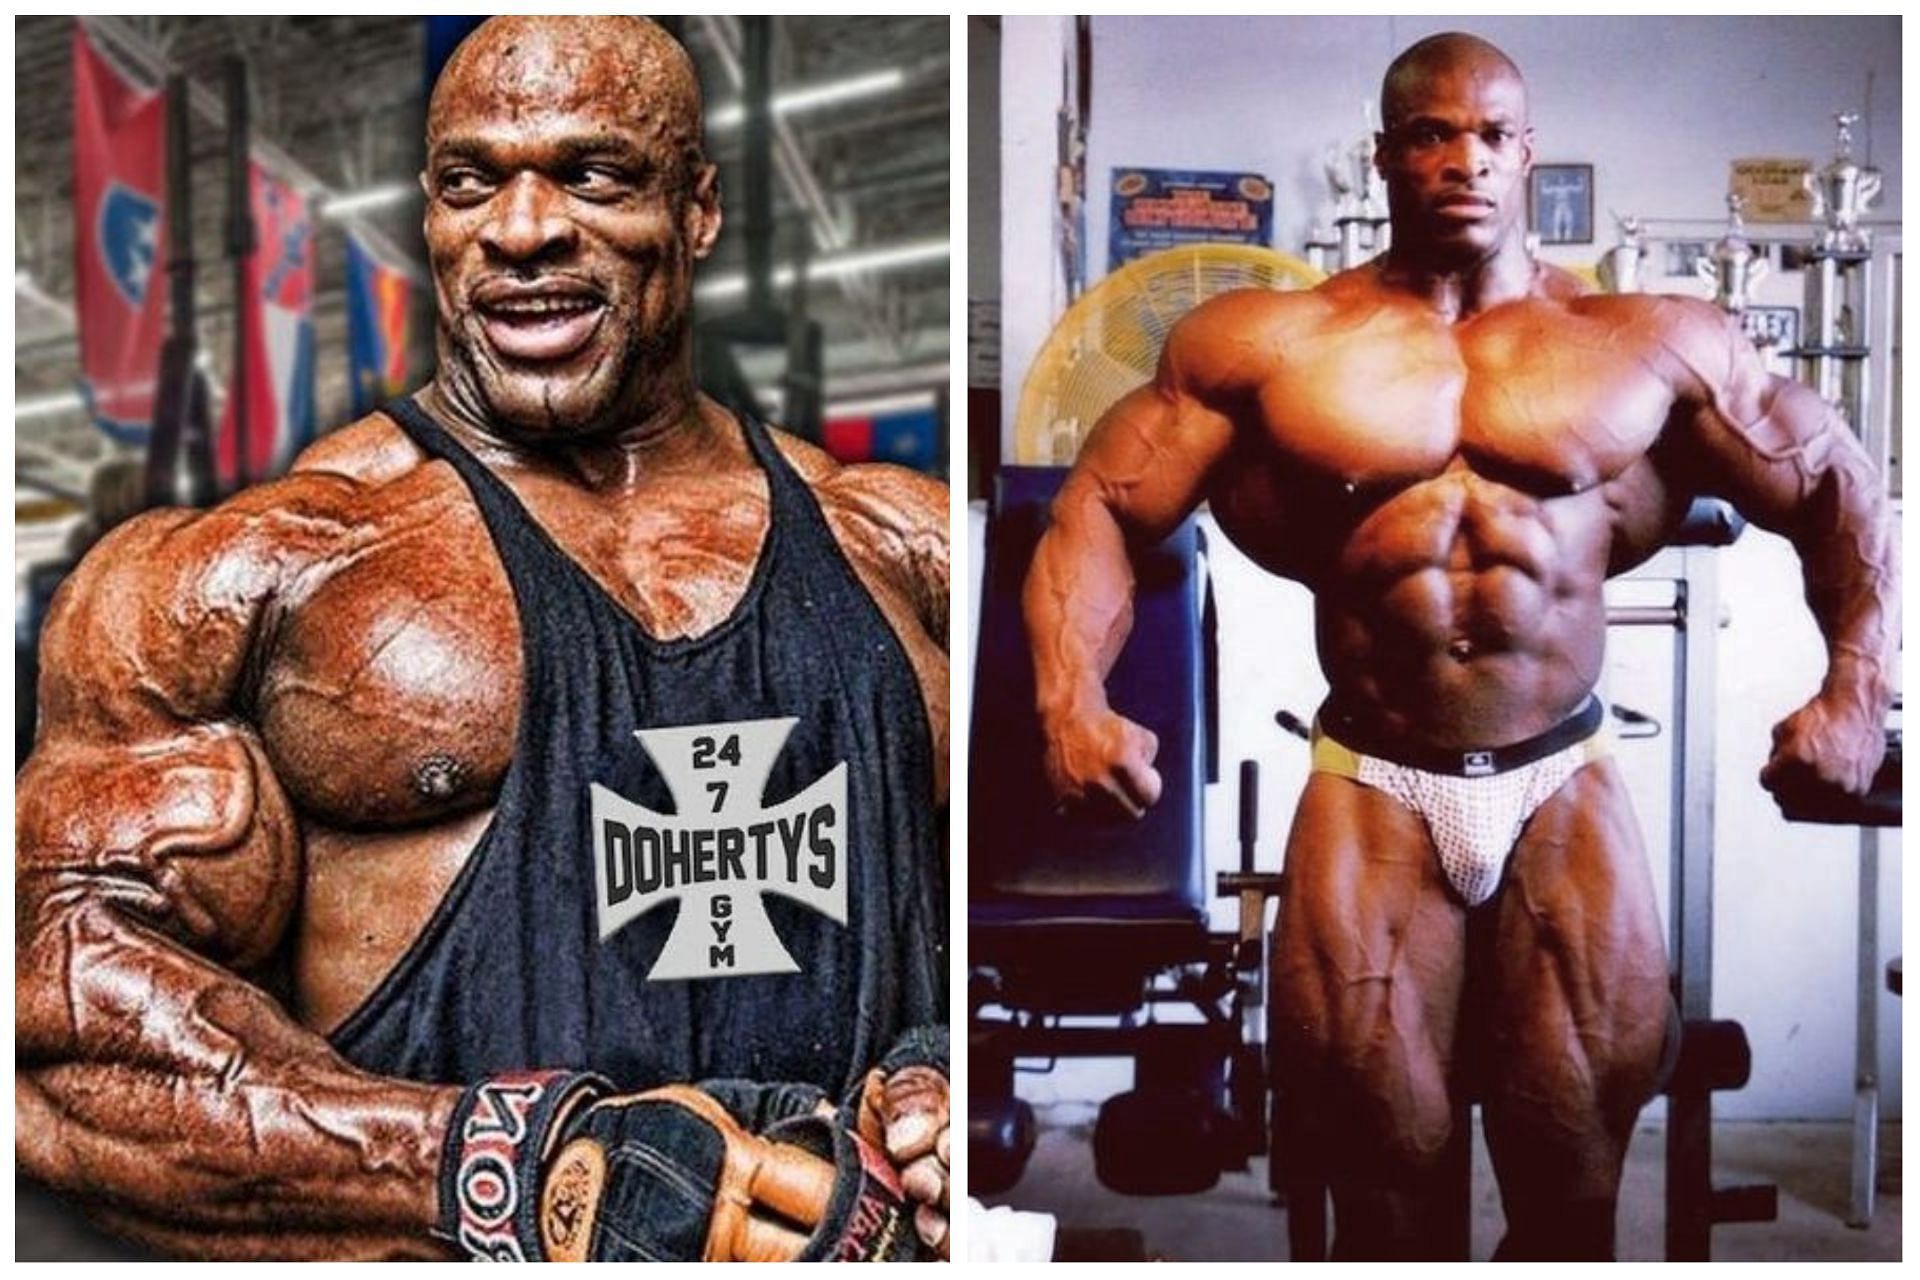 Legendary Ronnie Coleman poses for the camera (Images via Instagram @ronniecoleman8)